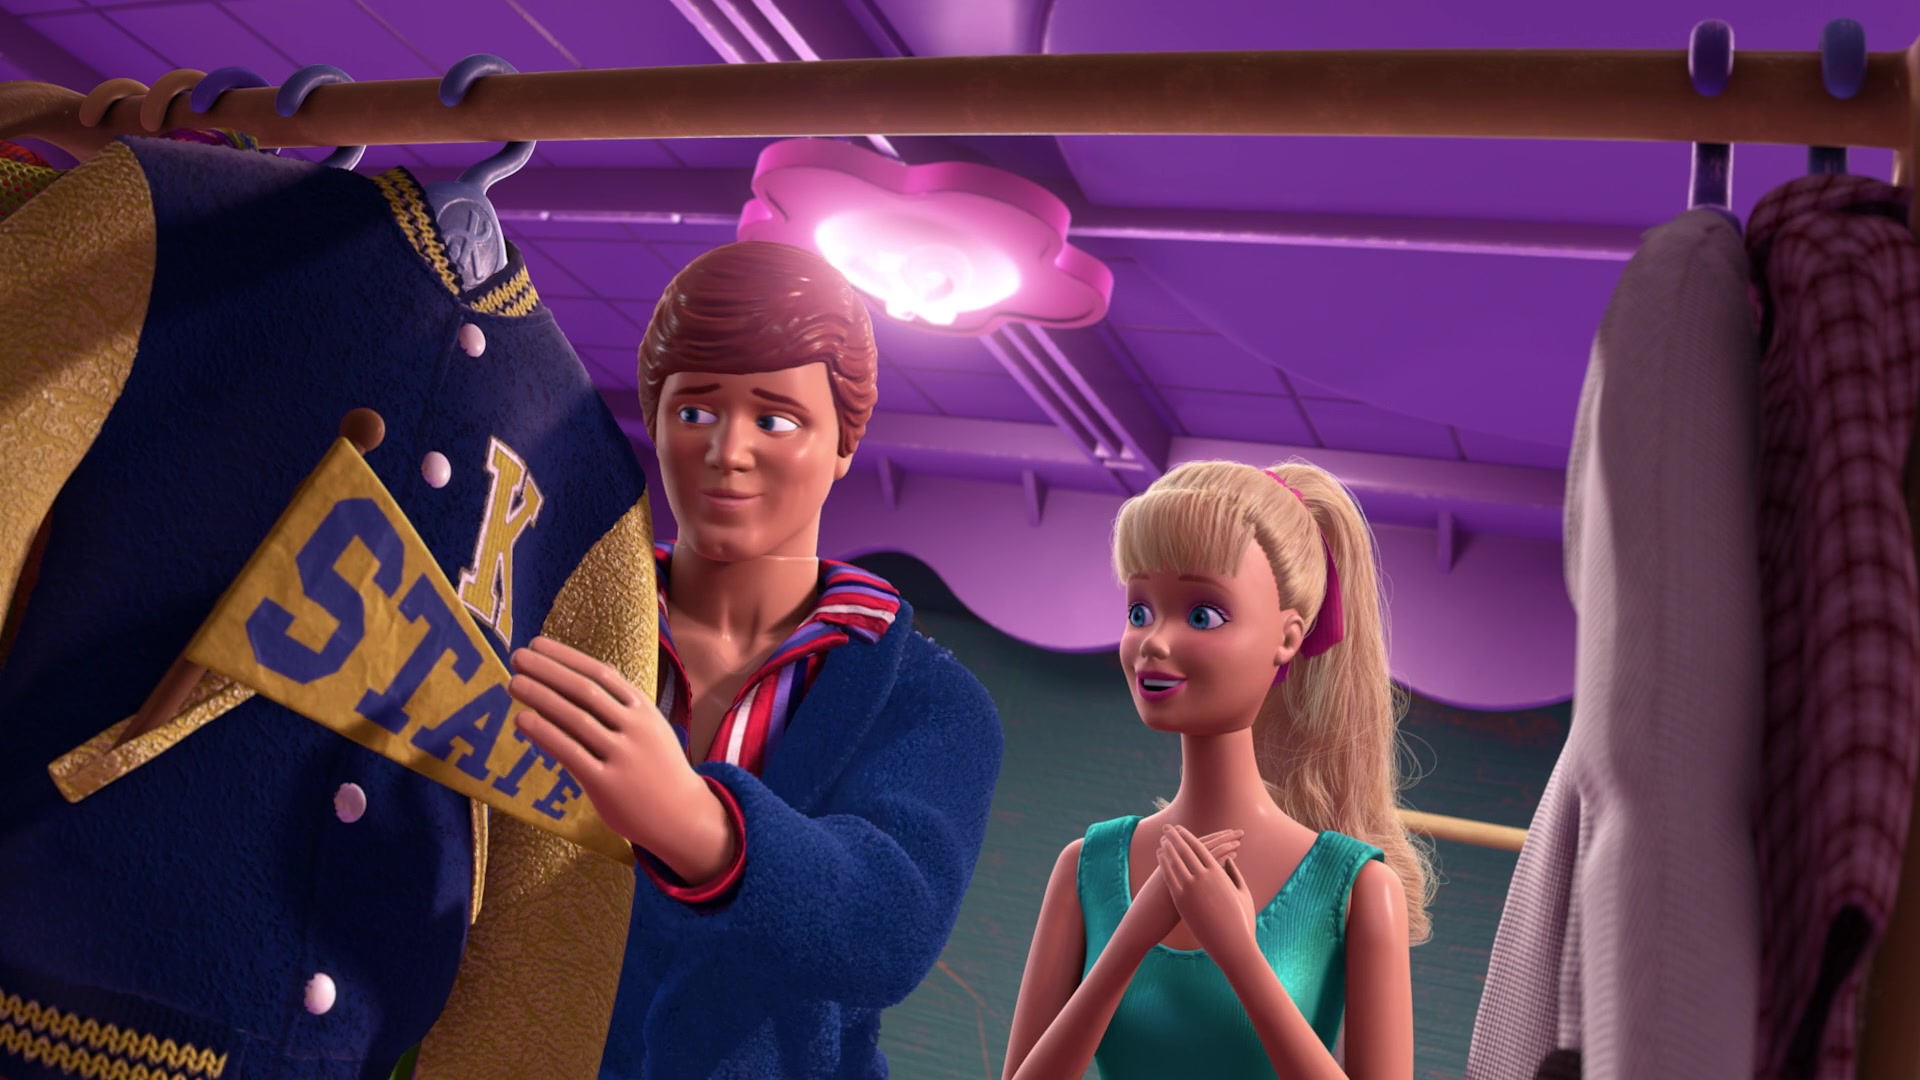 Barbie And Ken Dolls in Toy Story 3 (2010) .